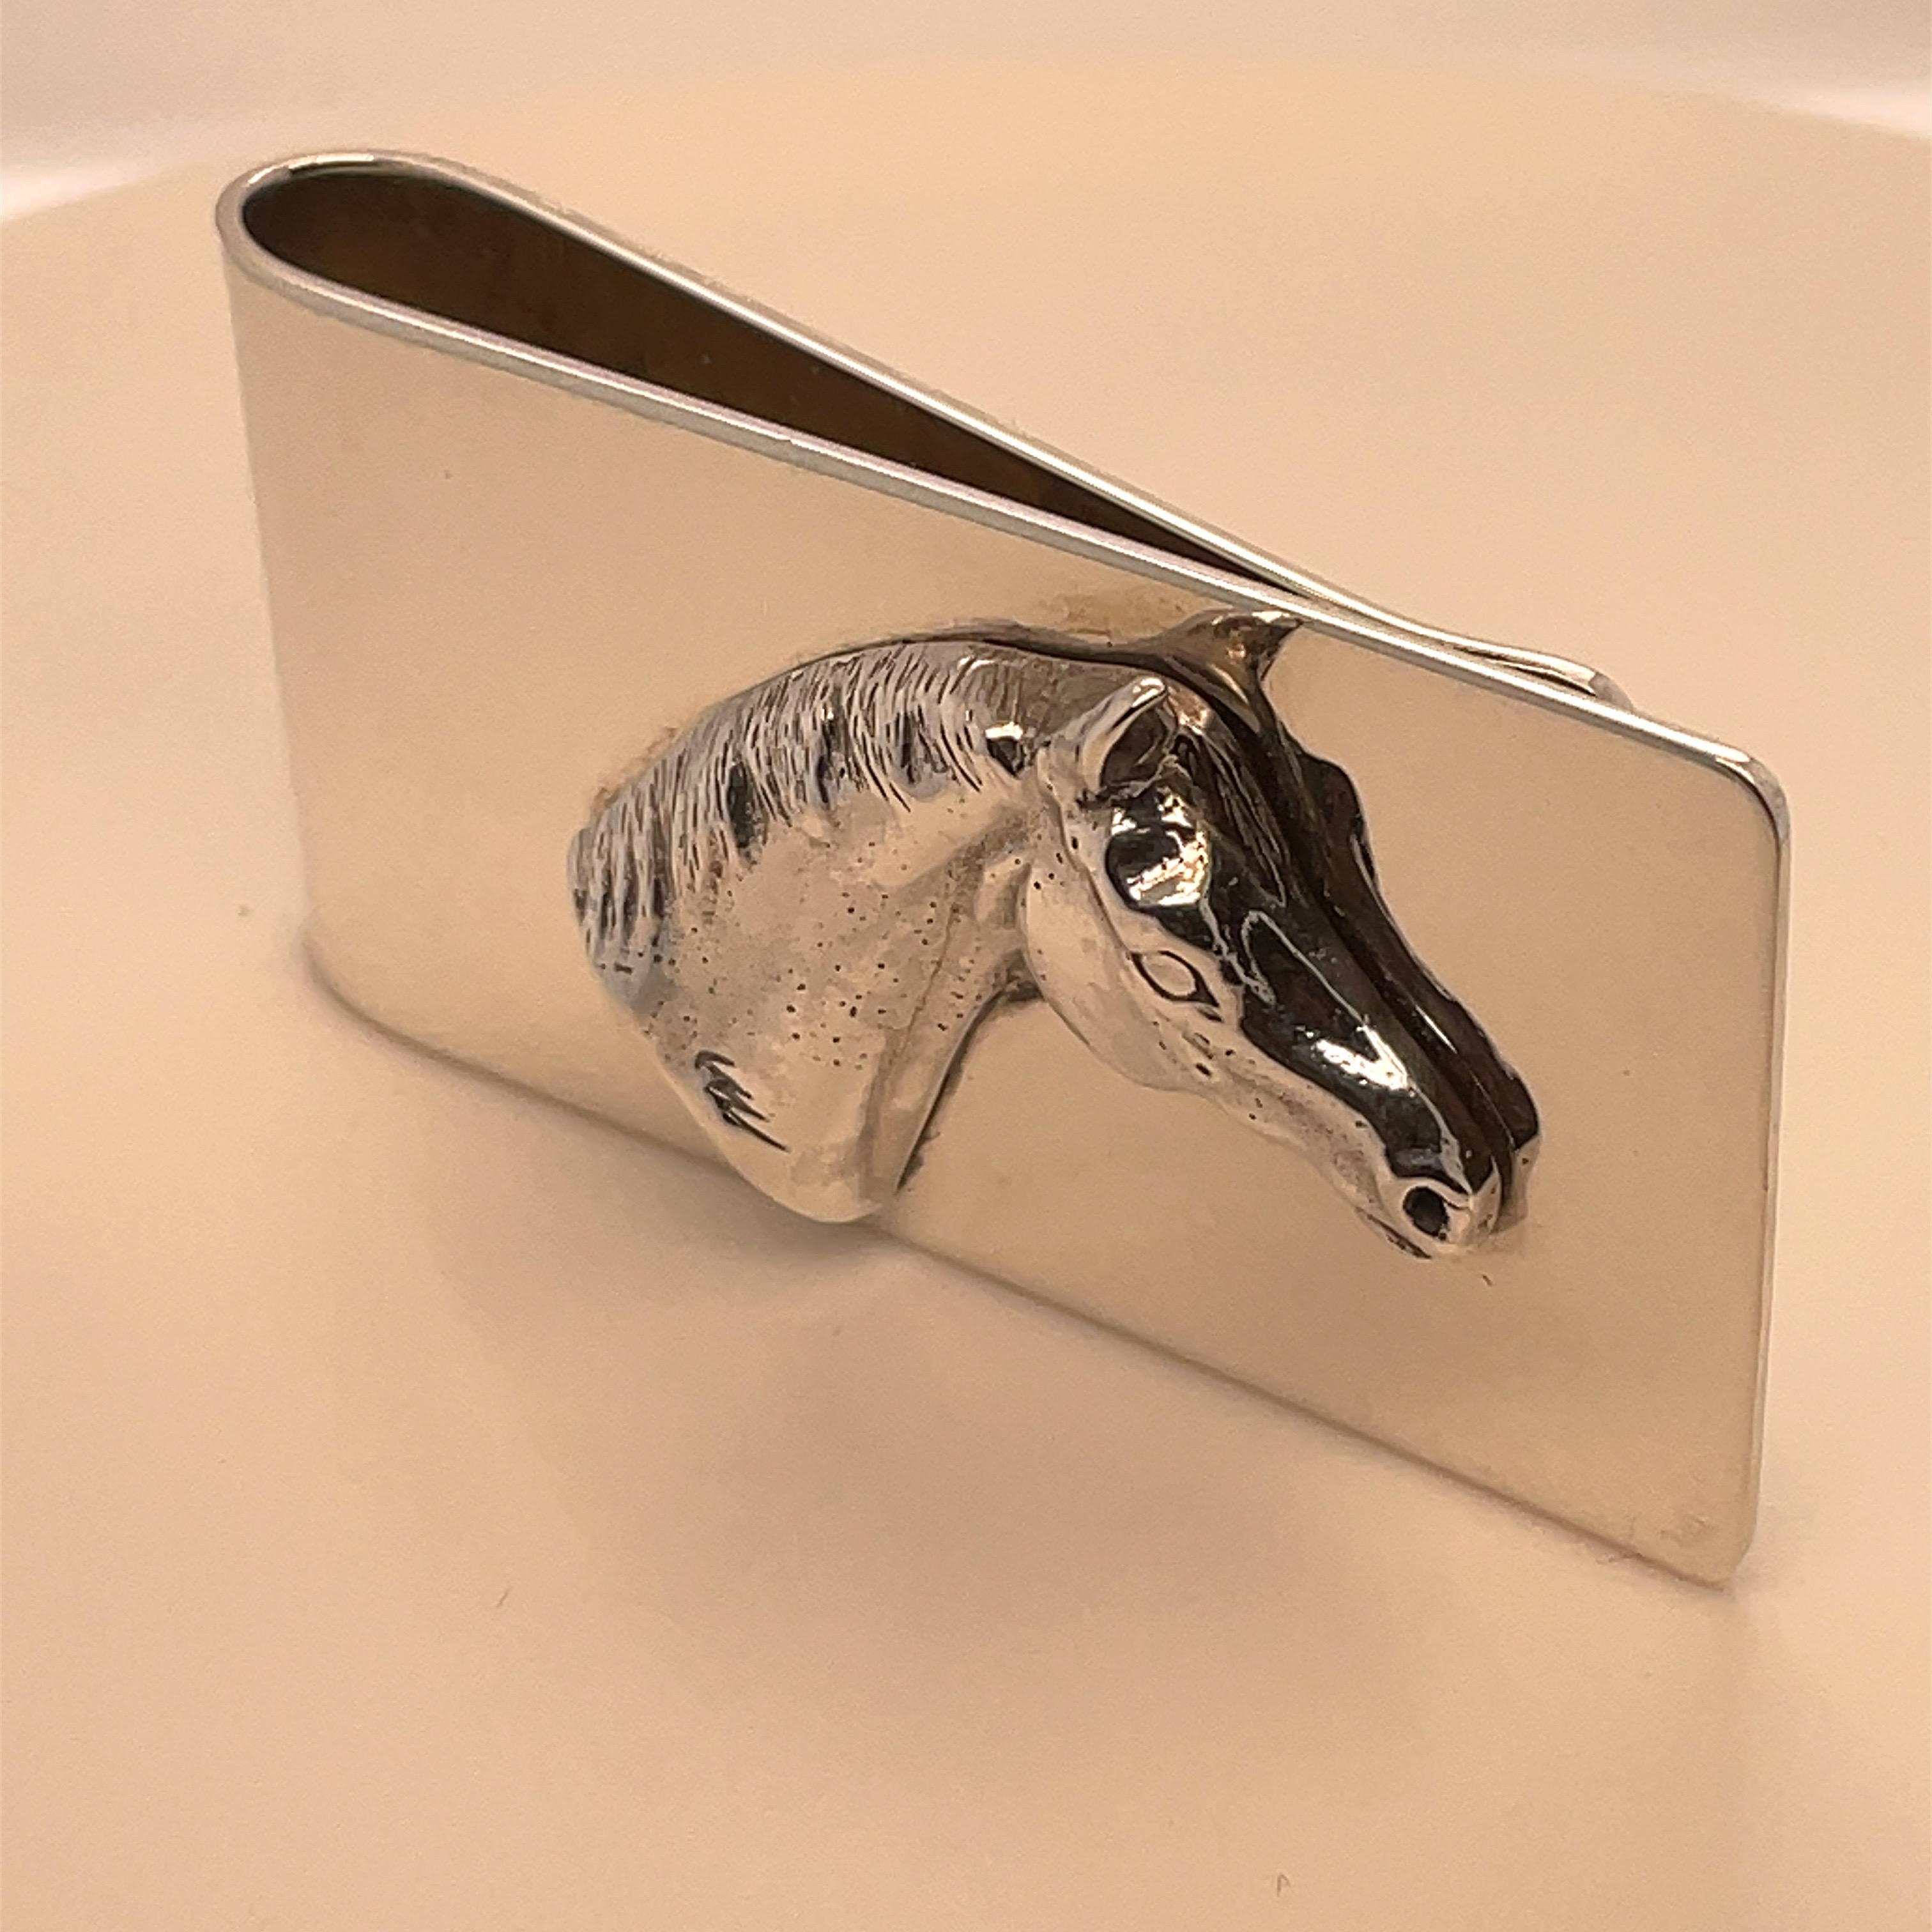 Outstanding sterling silver money clip.  Applied three-dimensional horse head in the center.  Super heavy gauge silver.  This is most substantial and impressive.
1 1/8